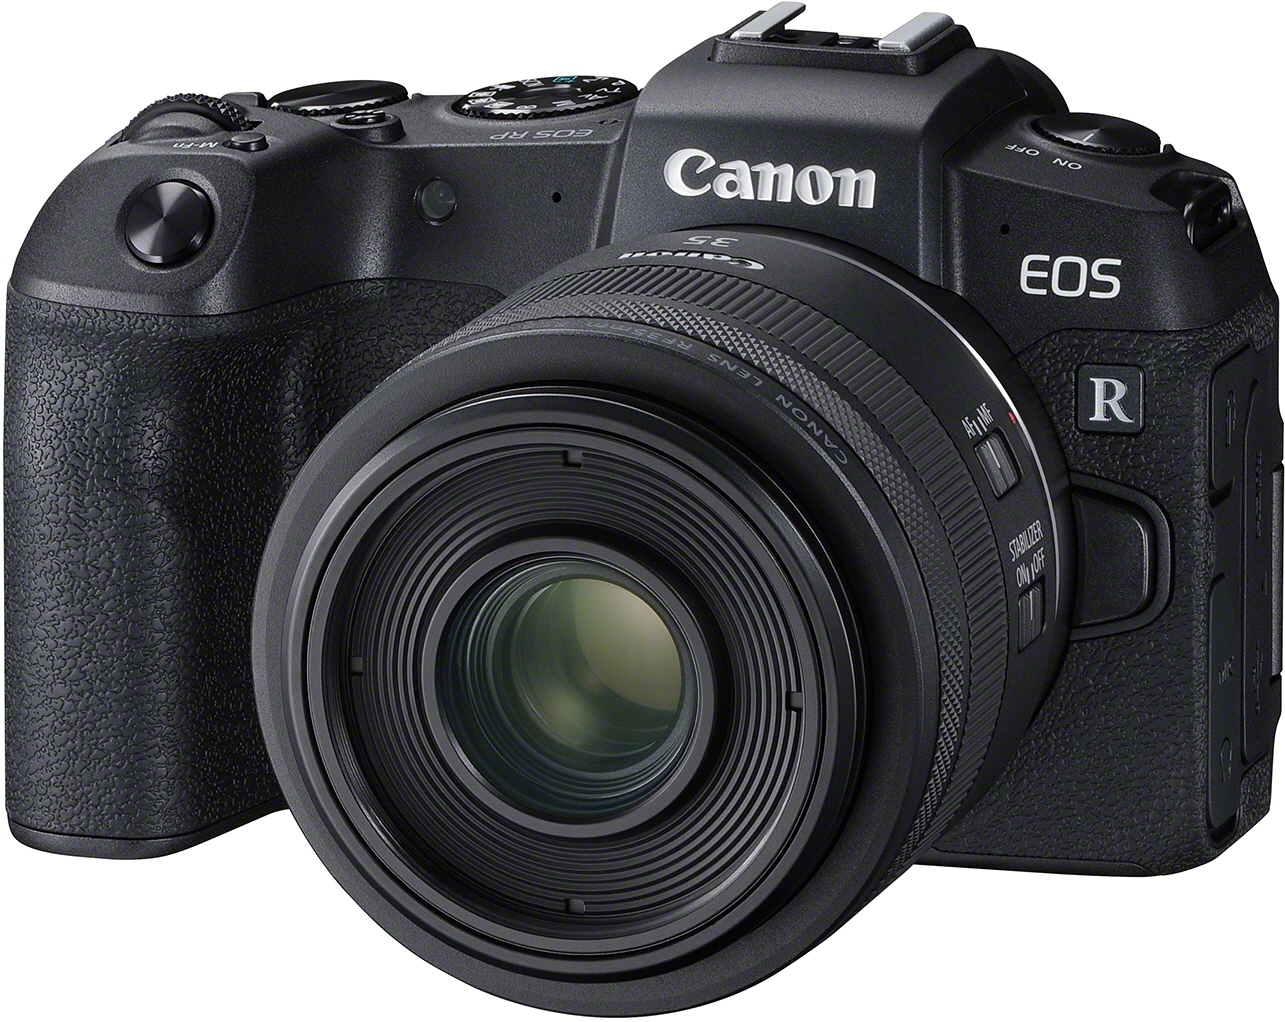 The EOS RP, a camera that has impressed me so much I am considering this as a parallel system to my Canon 5D4